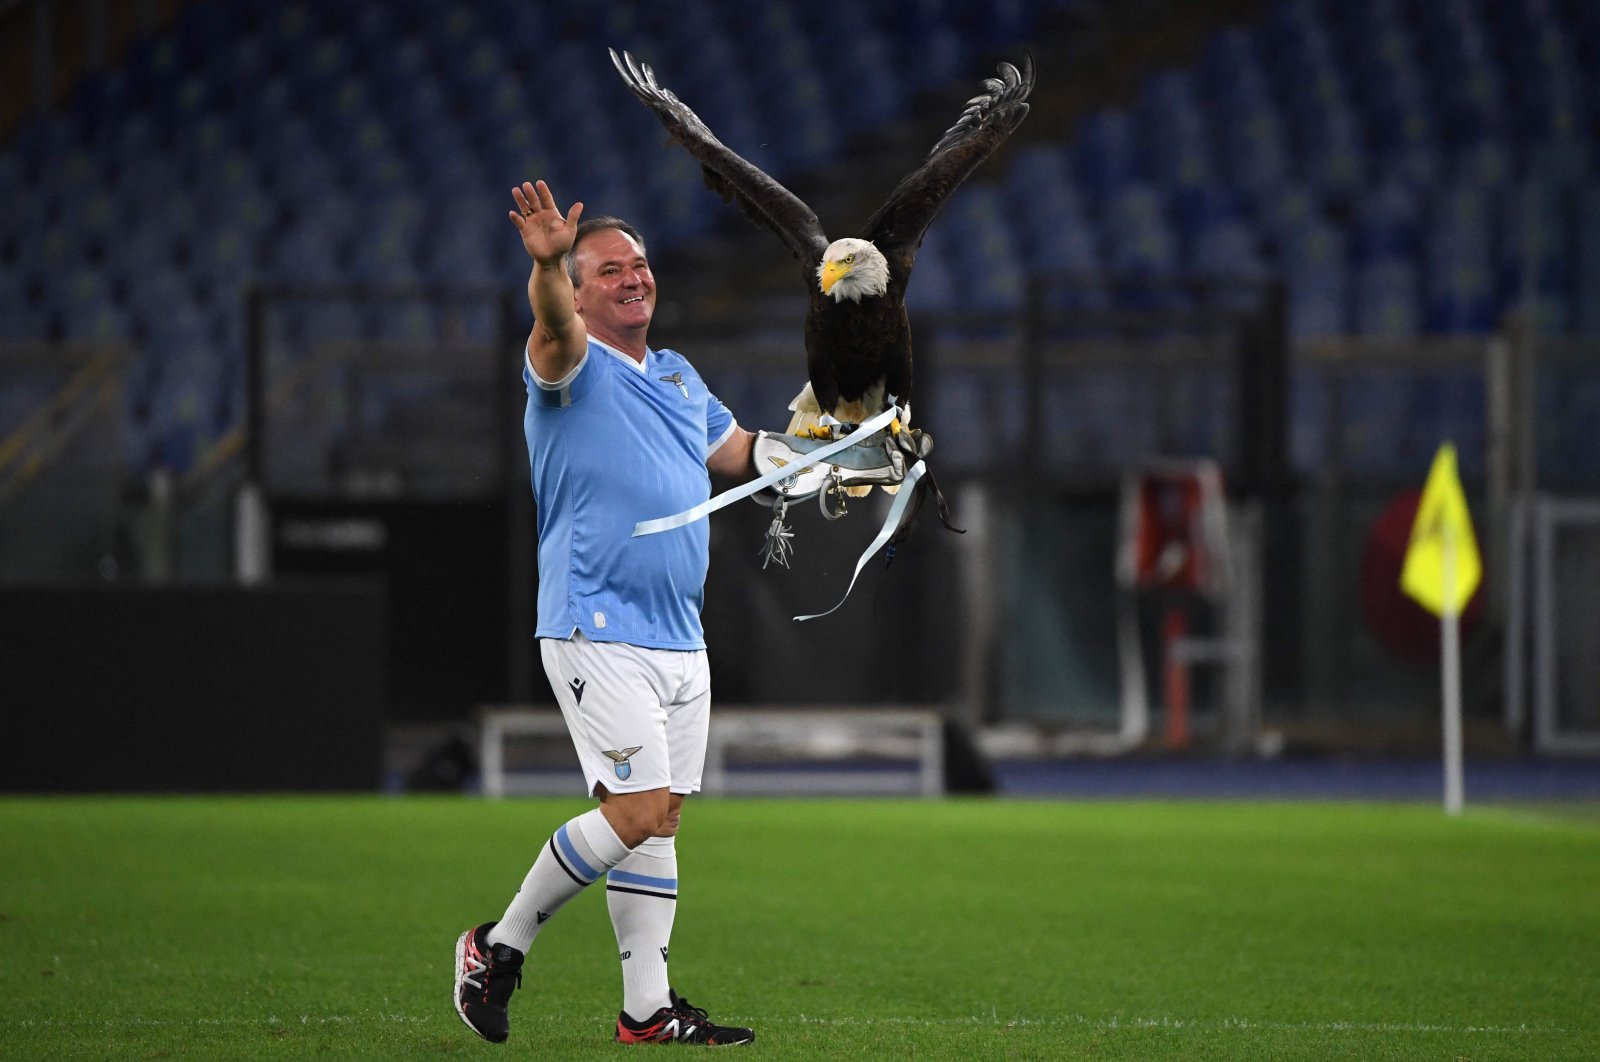 A falconer holds Lazio's mascot eagle "Olimpia" after it flew over the stadium prior to the UEFA Europa League Group E football match between Lazio Rome and Lokomotiv Moscow on Sept. 30, 2021, at the Olympic stadium in Rome. (AFP Photo)